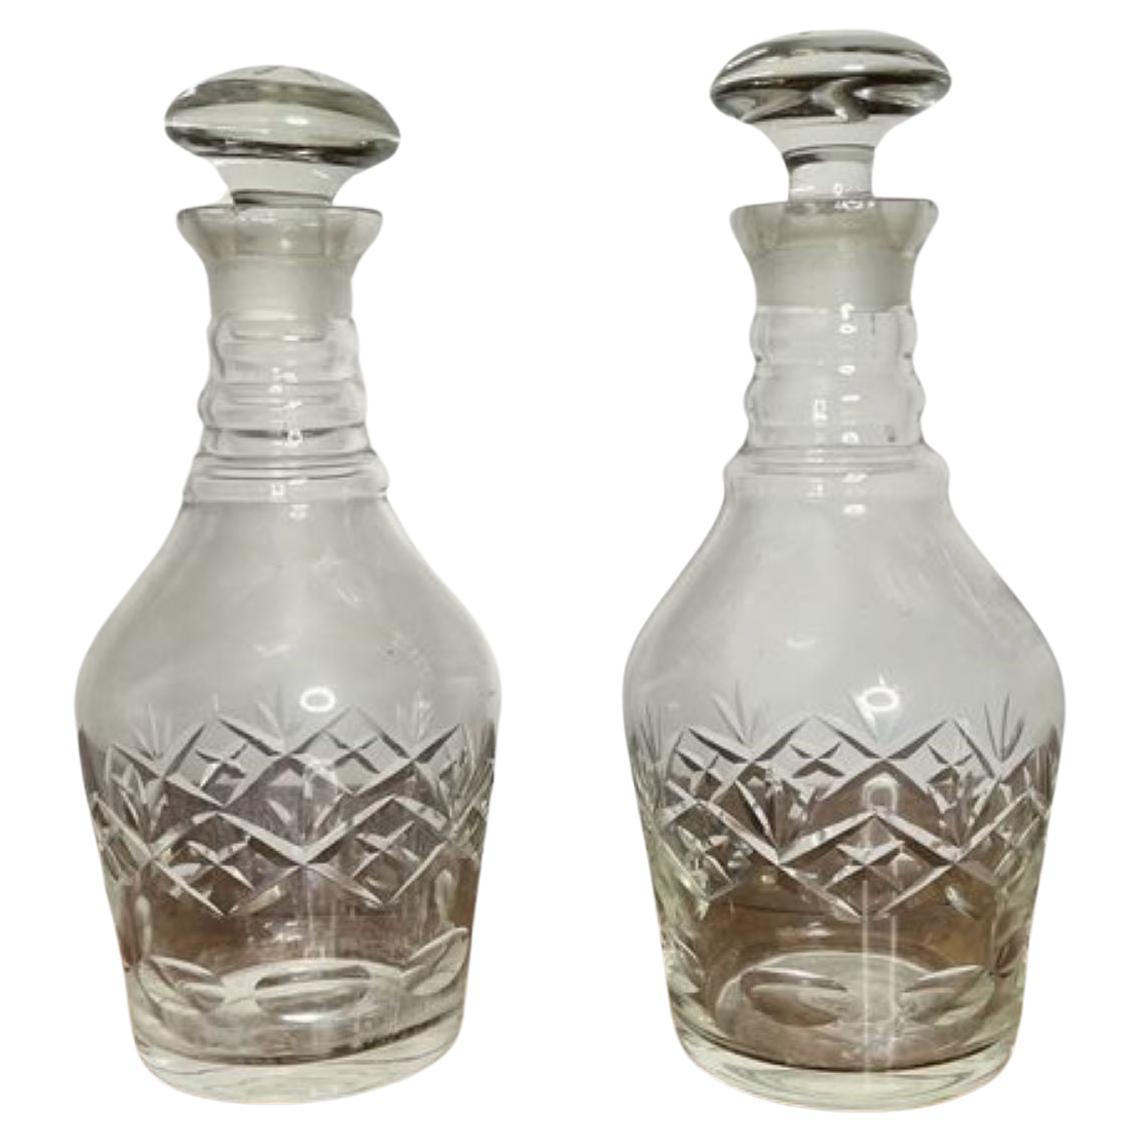 Wonderful pair of antique Victorian cut glass decanters 